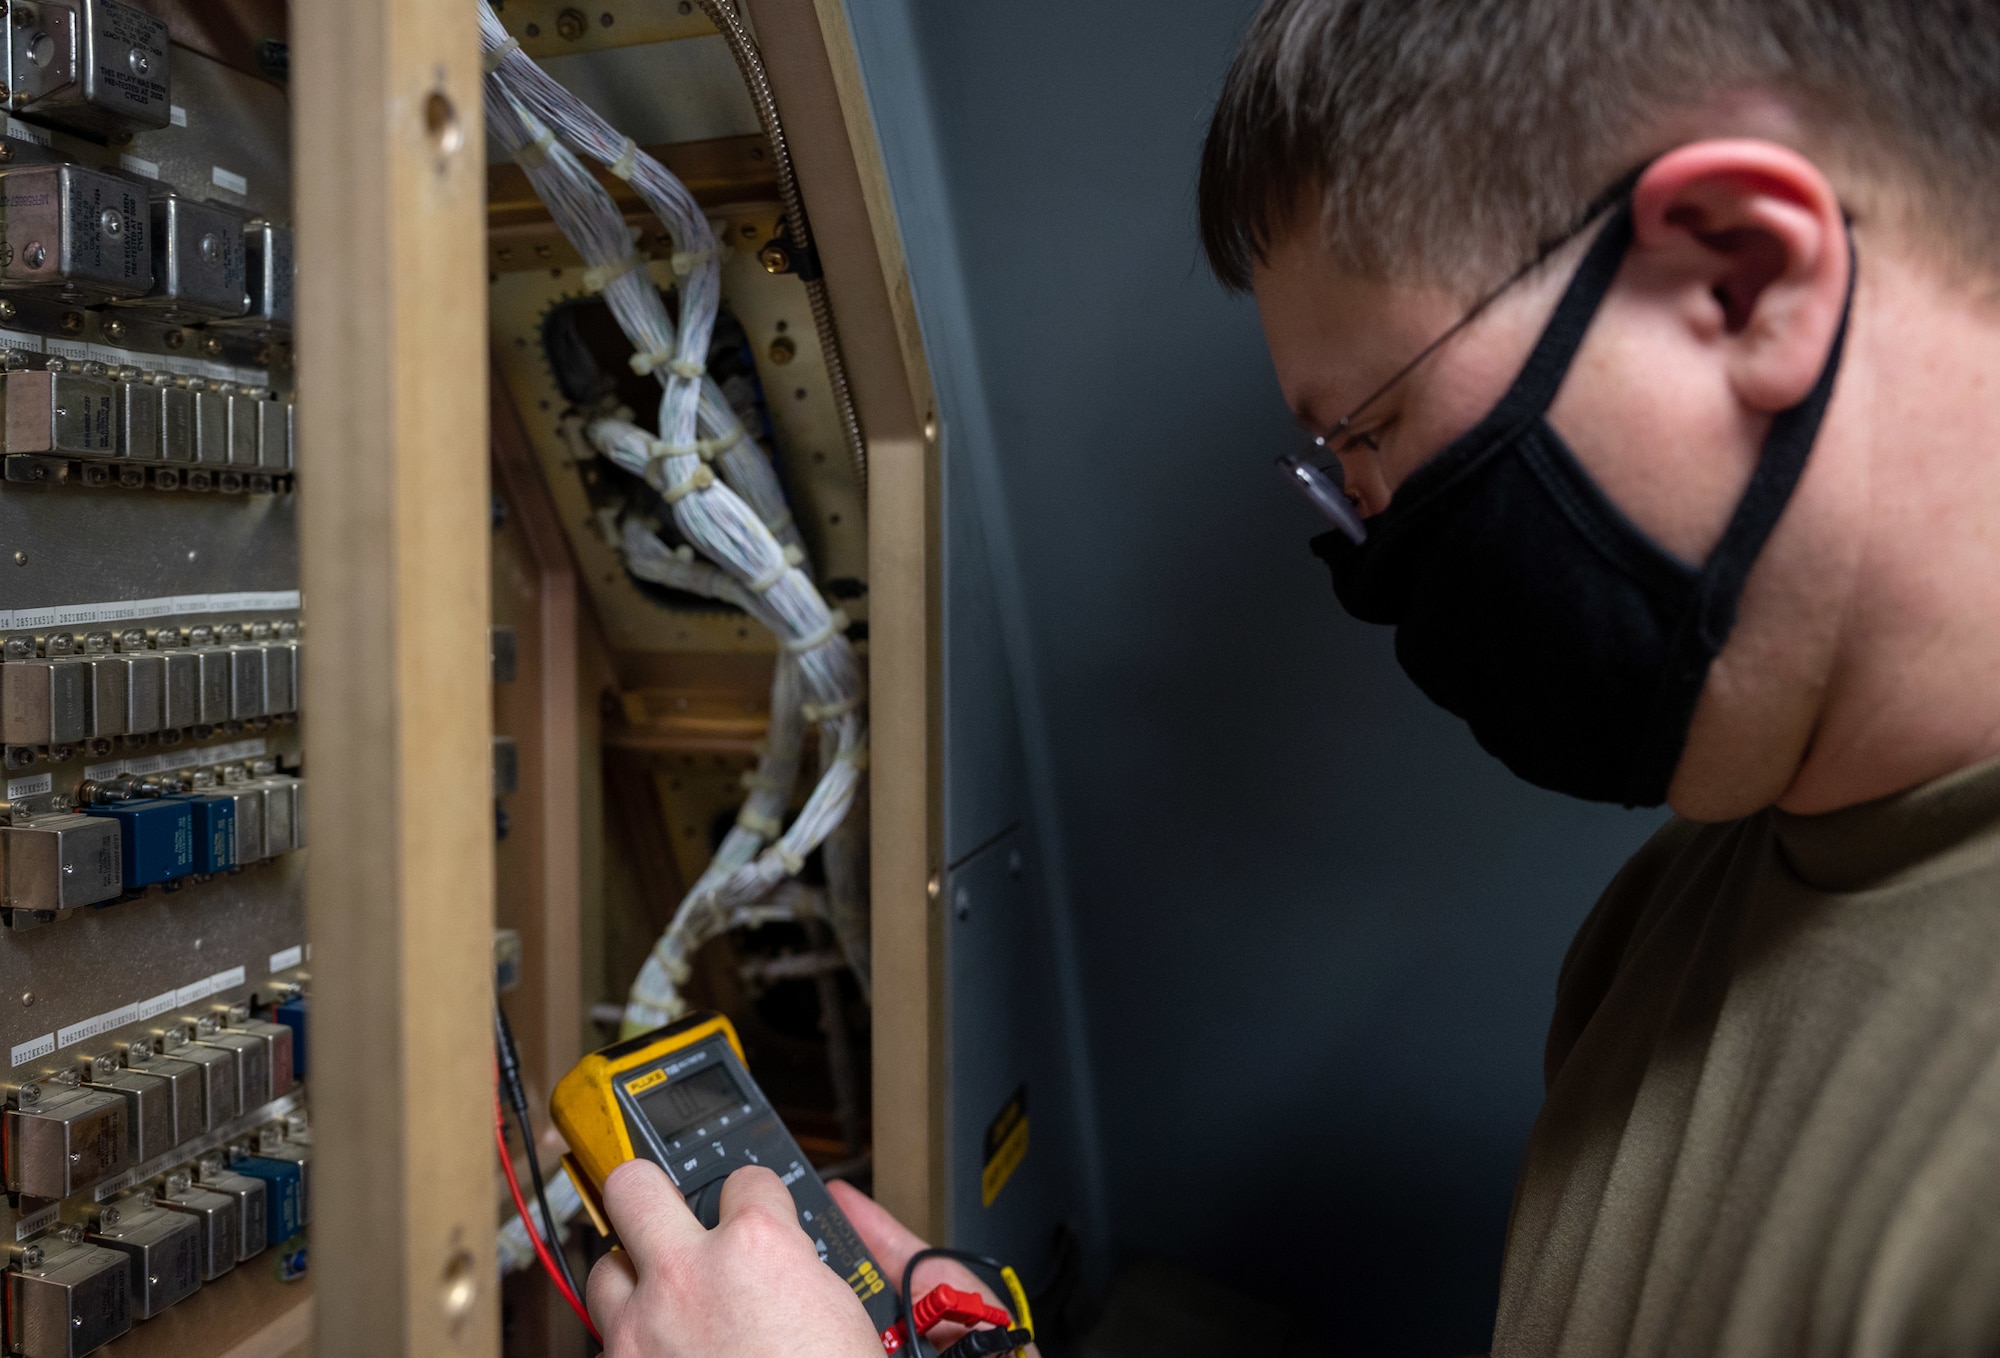 Tech. Sgt. Rian Meyer, 736th Maintenance Squadron electrical and environmental systems craftsman, tests voltage from an electricity panel on a Dover Air Force Base C-17 Globemaster III at Moody AFB, Georgia, Feb. 28, 2021. Aircrew from the 3rd Airlift Squadron identified a faulty plug housing on the C-17 following the completion of Exercise Mosaic Tiger. A three-Airmen Maintenance Recovery Team from Dover AFB was alerted and mobilized within 24 hours. The MRT, along with the flying crew chief assigned to the C-17, coordinated parts and tools from Joint Base Charleston, South Carolina, to ensure the successful return of the aircraft to Dover AFB. (U.S. Air Force photo by Airman 1st Class Faith Schaefer)